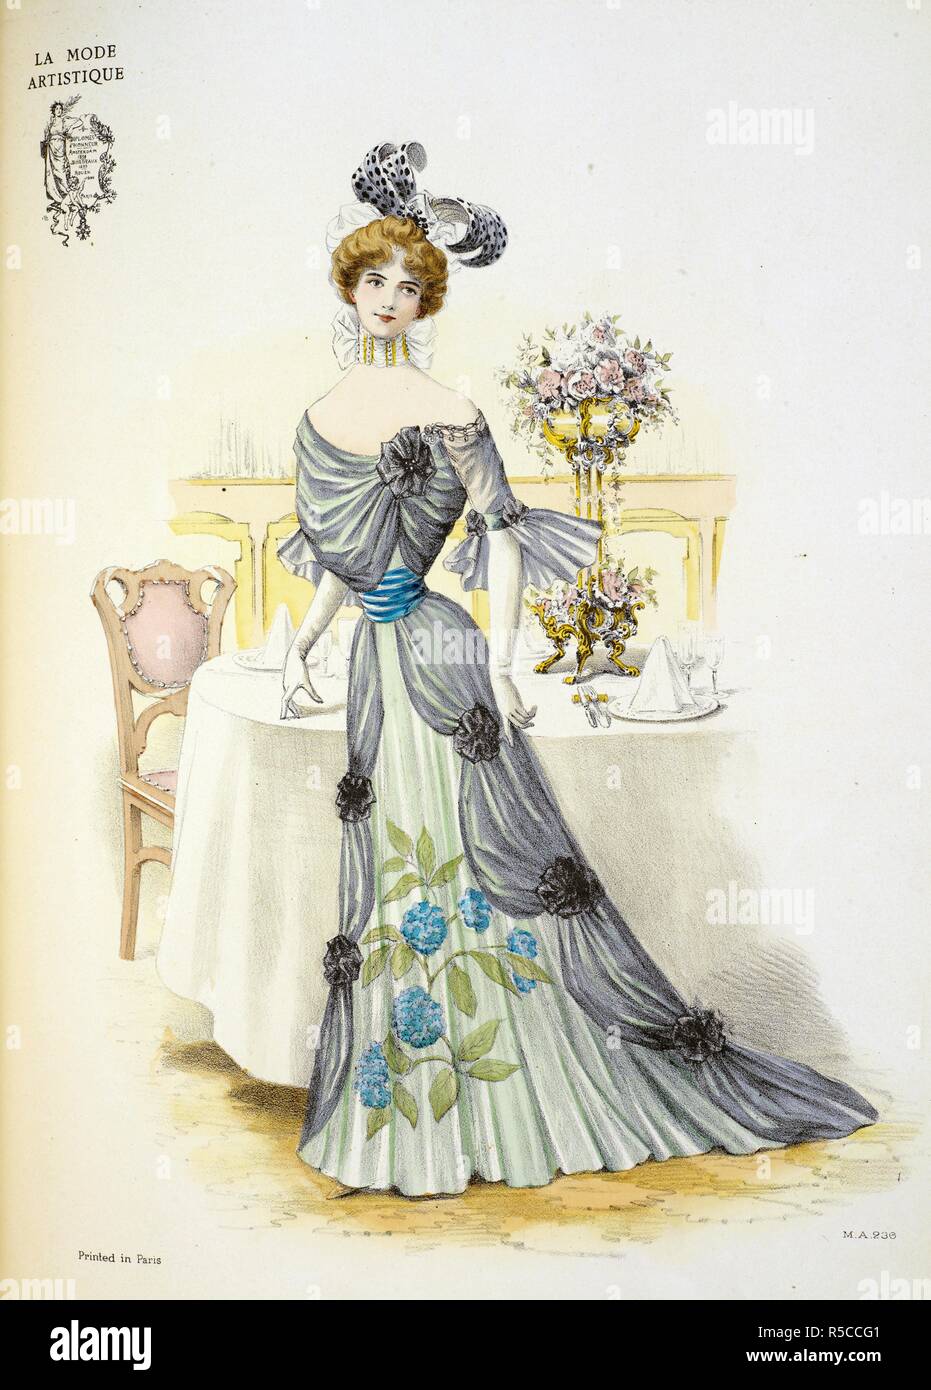 Design by Barroin. An evening dress. It is made of black mousseline de soie, the over-skirt draped back in festoons which are caught up at intervals with full rosettes of black velvet. It opens over a petticoat of white satin veiled with pleated mousseline in a shade of green, upon which is painted a cluster of hortensias. The corsage is draped to match the skirt, a belt of blue satin encircling the waist. The head-dress is particularly striking: a mere rien of white velvet, the quills studded with black paillettes and caught together with a large jet ornament. The Powder Puff [An English edit Stock Photo